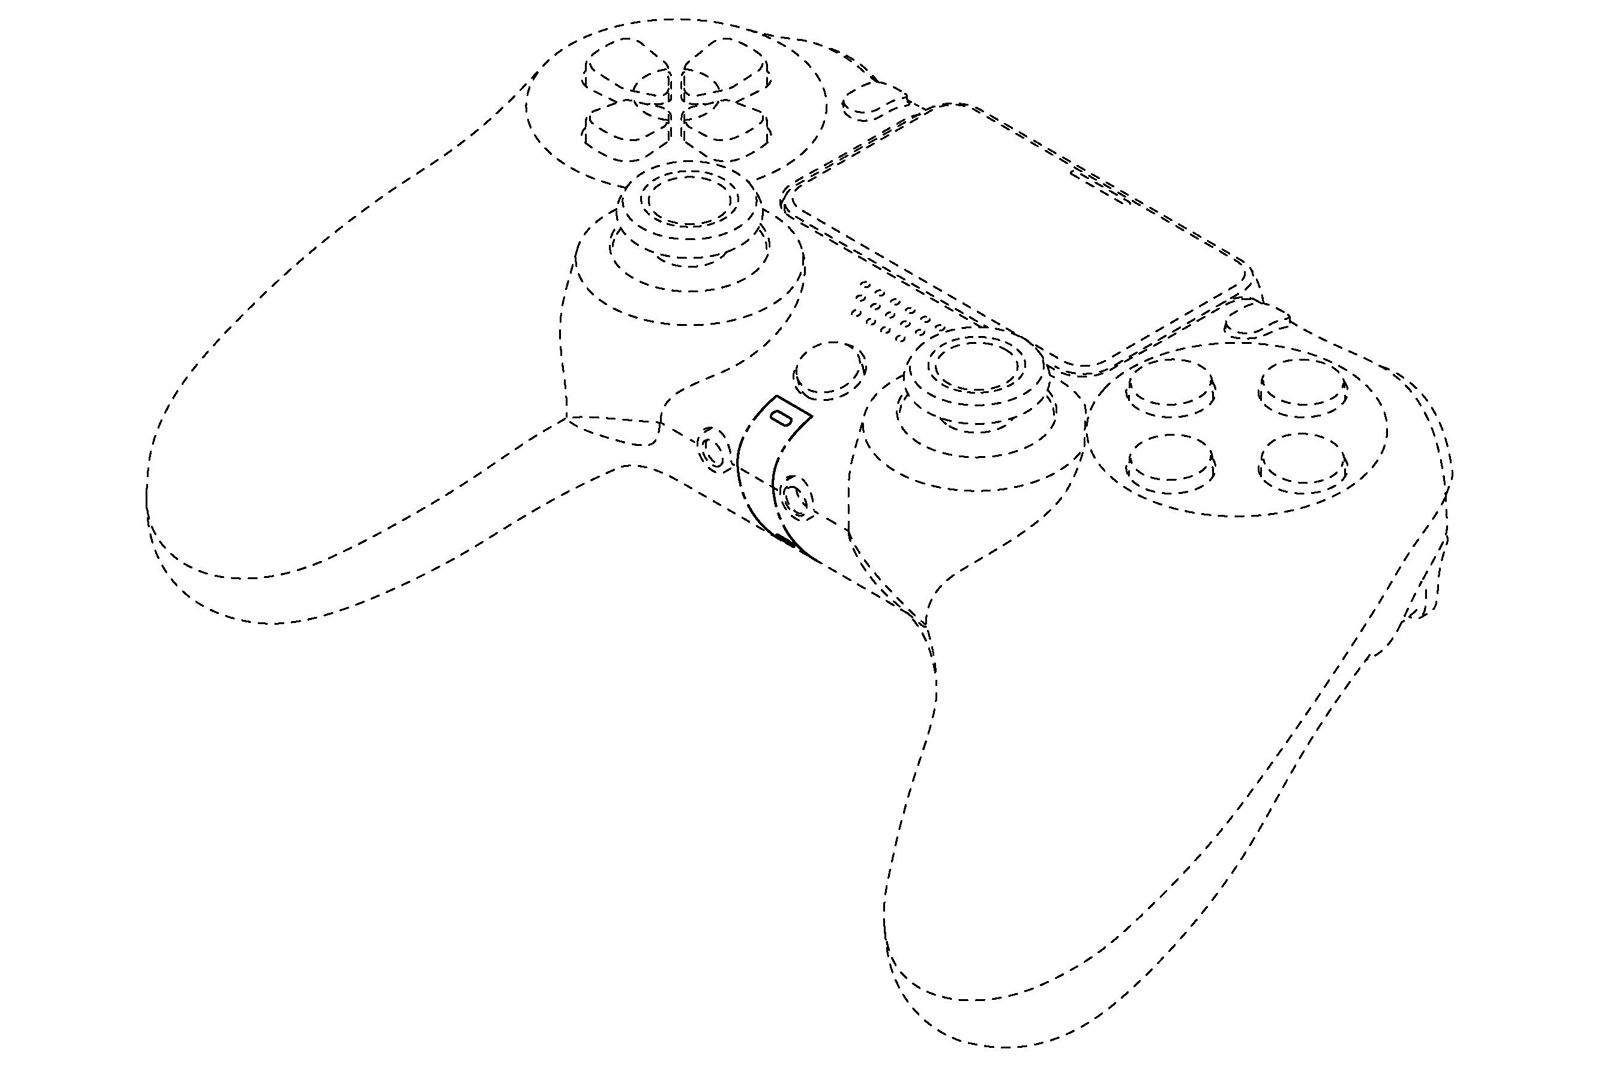 Sony confirms PS5 SSD cartridges and DualShock 5 shown in patent image 2